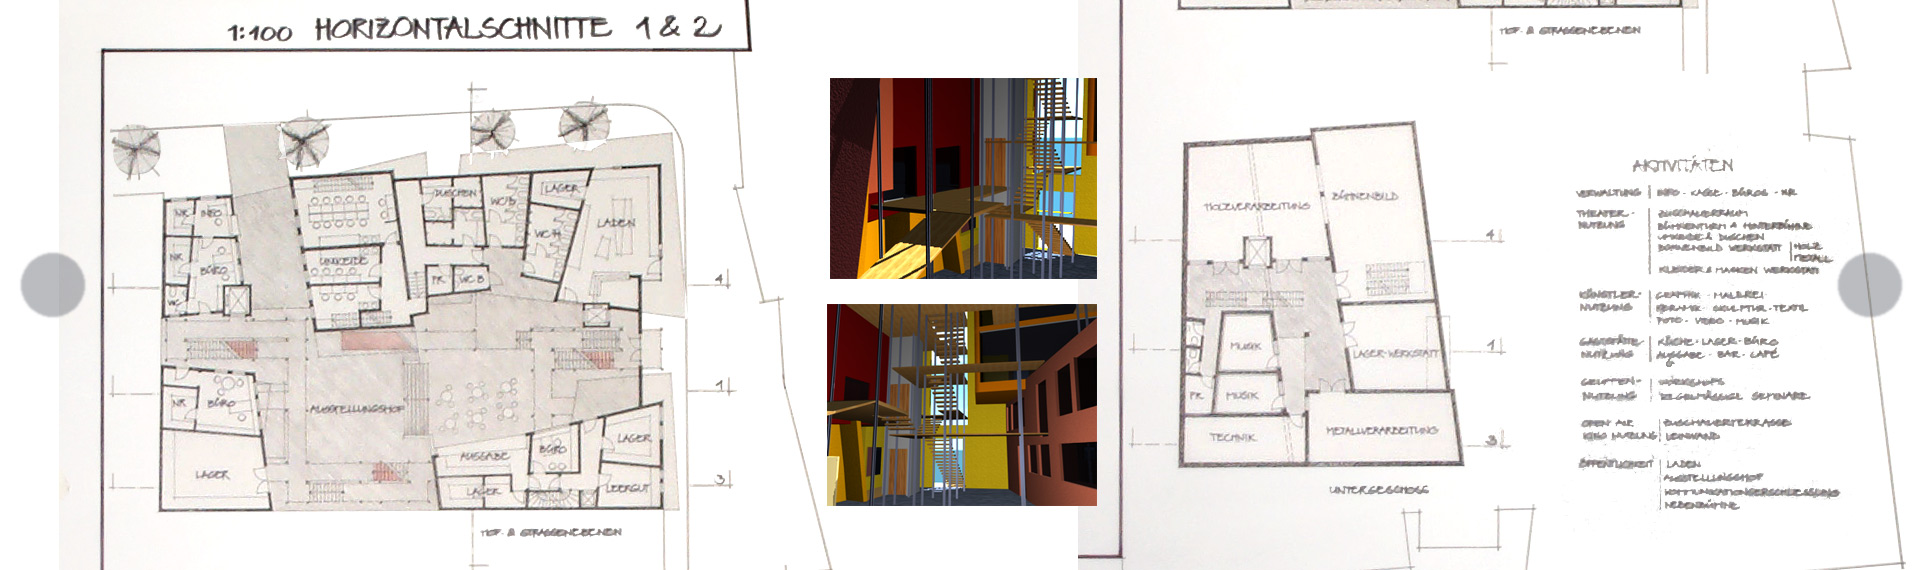 Some of the plans of the artist house